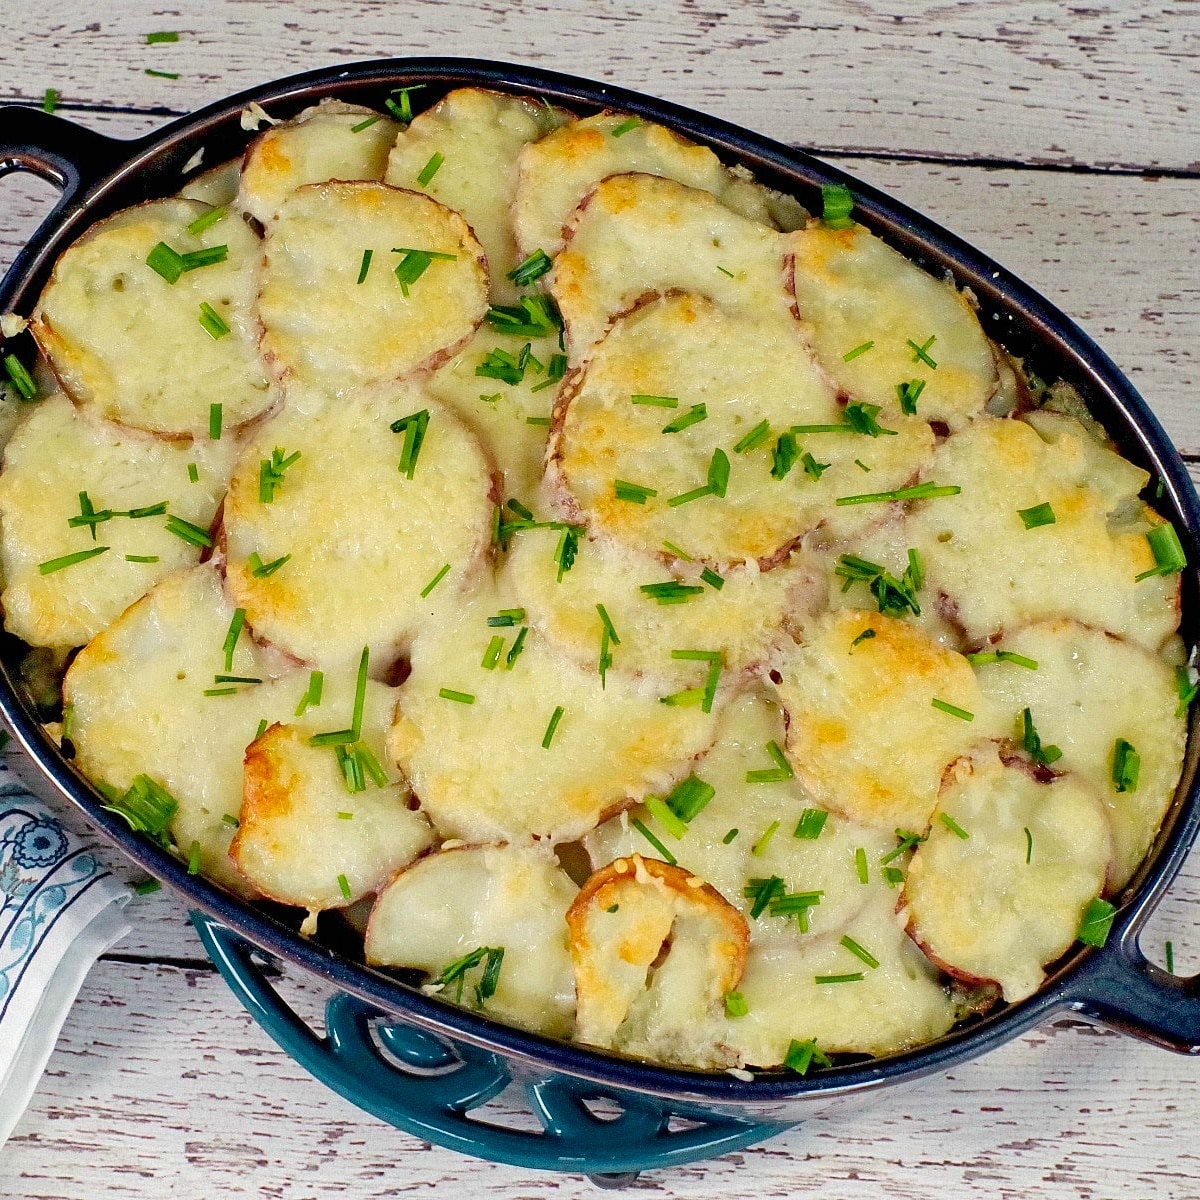 Potato, Spinach and Beef Casserole